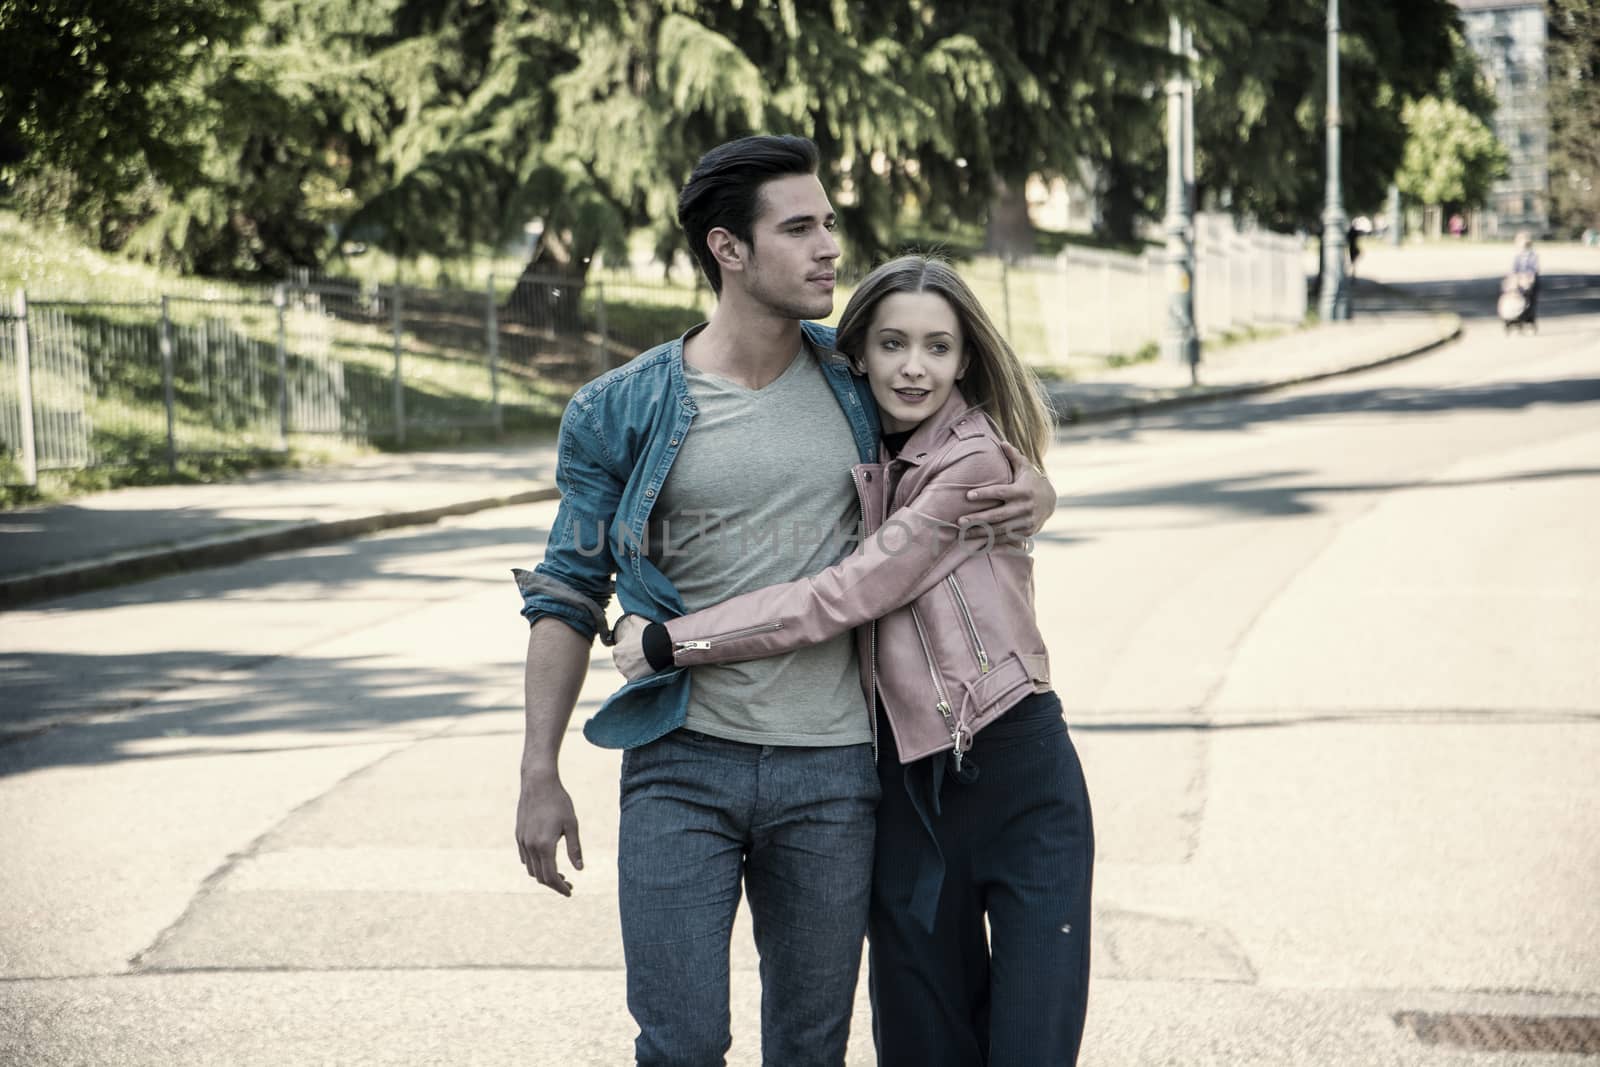 Attractive romantic couple, young man and girl standing by artofphoto